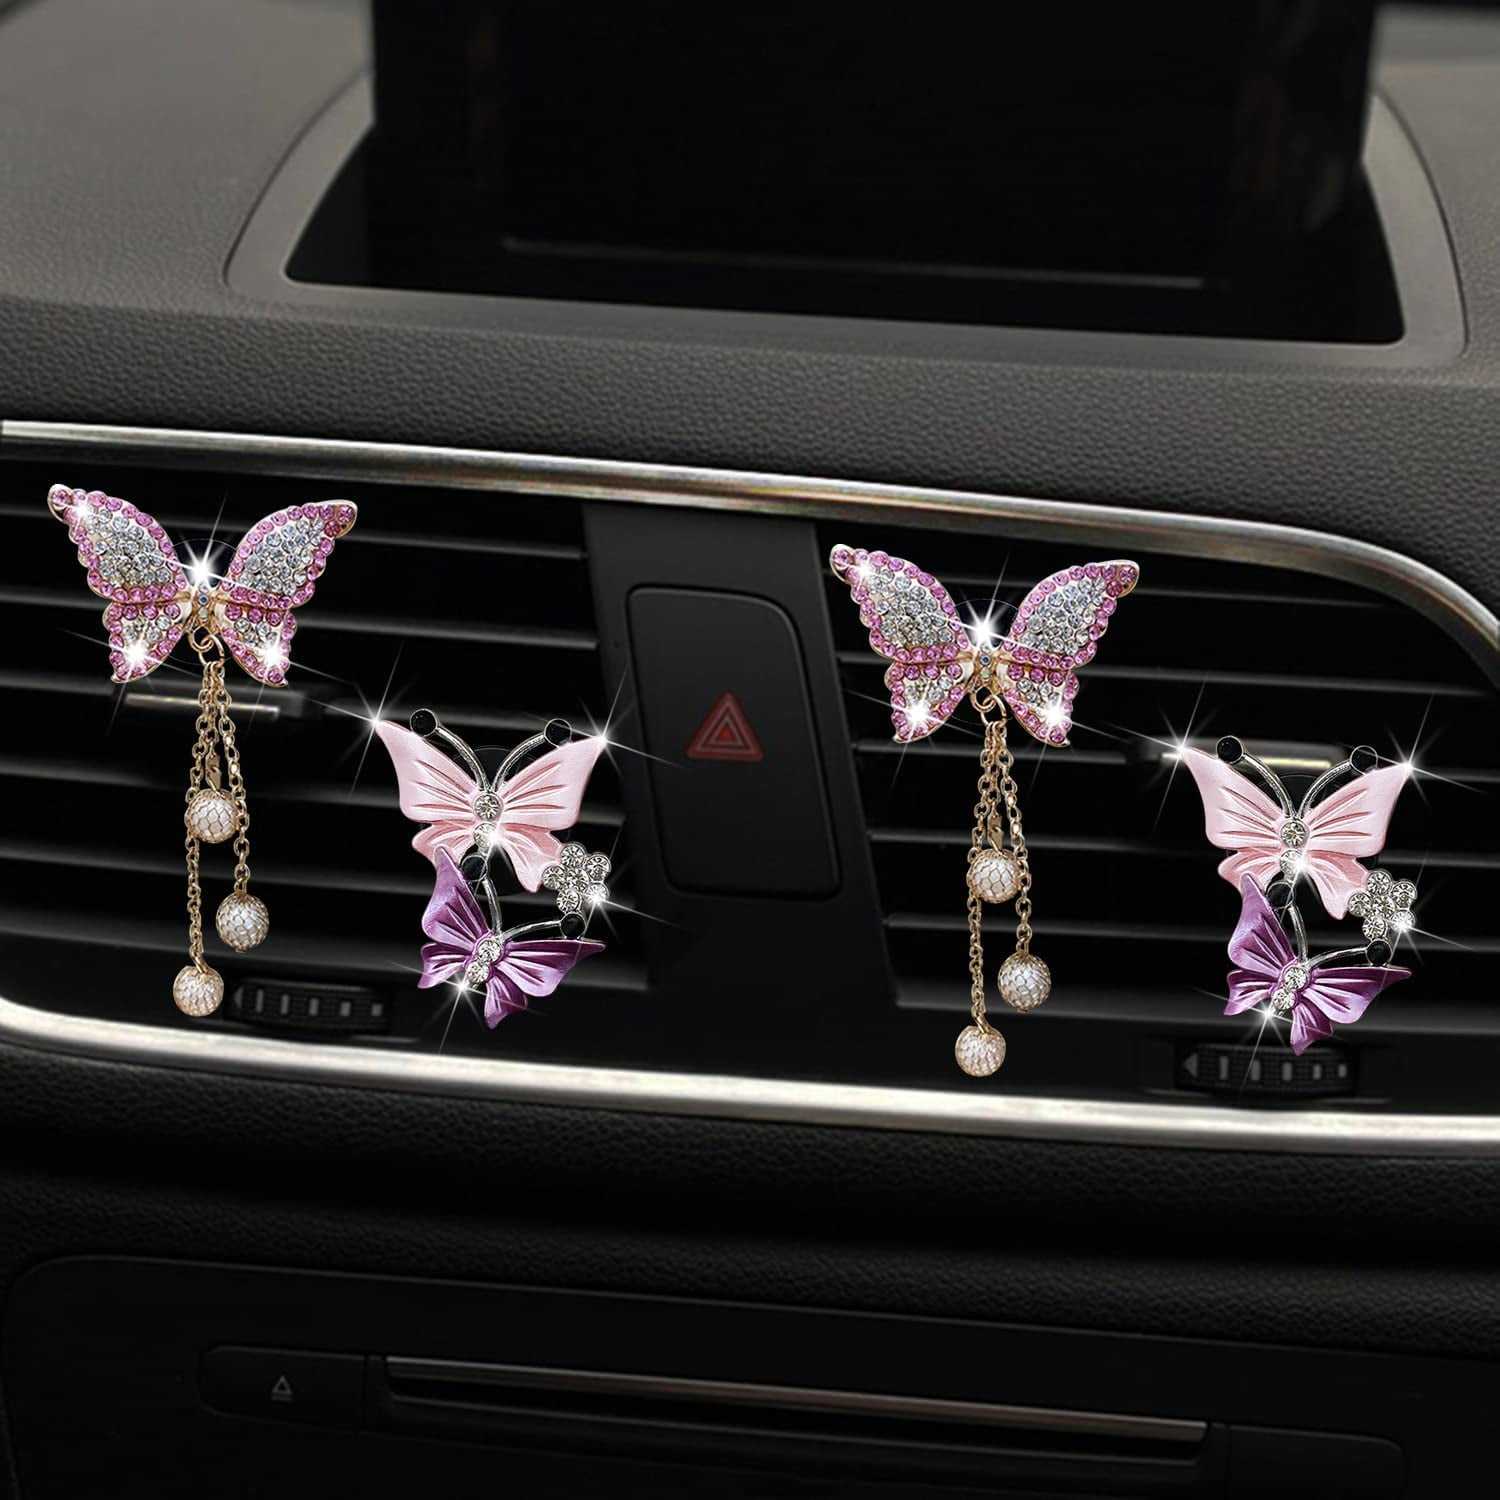 Car Air Fresheners for Women Automotive Vent Decorate Accessories 5 Pieces  Cute Flower Butterfly Car Vent Clips Scents Fresheners, Home Car Office